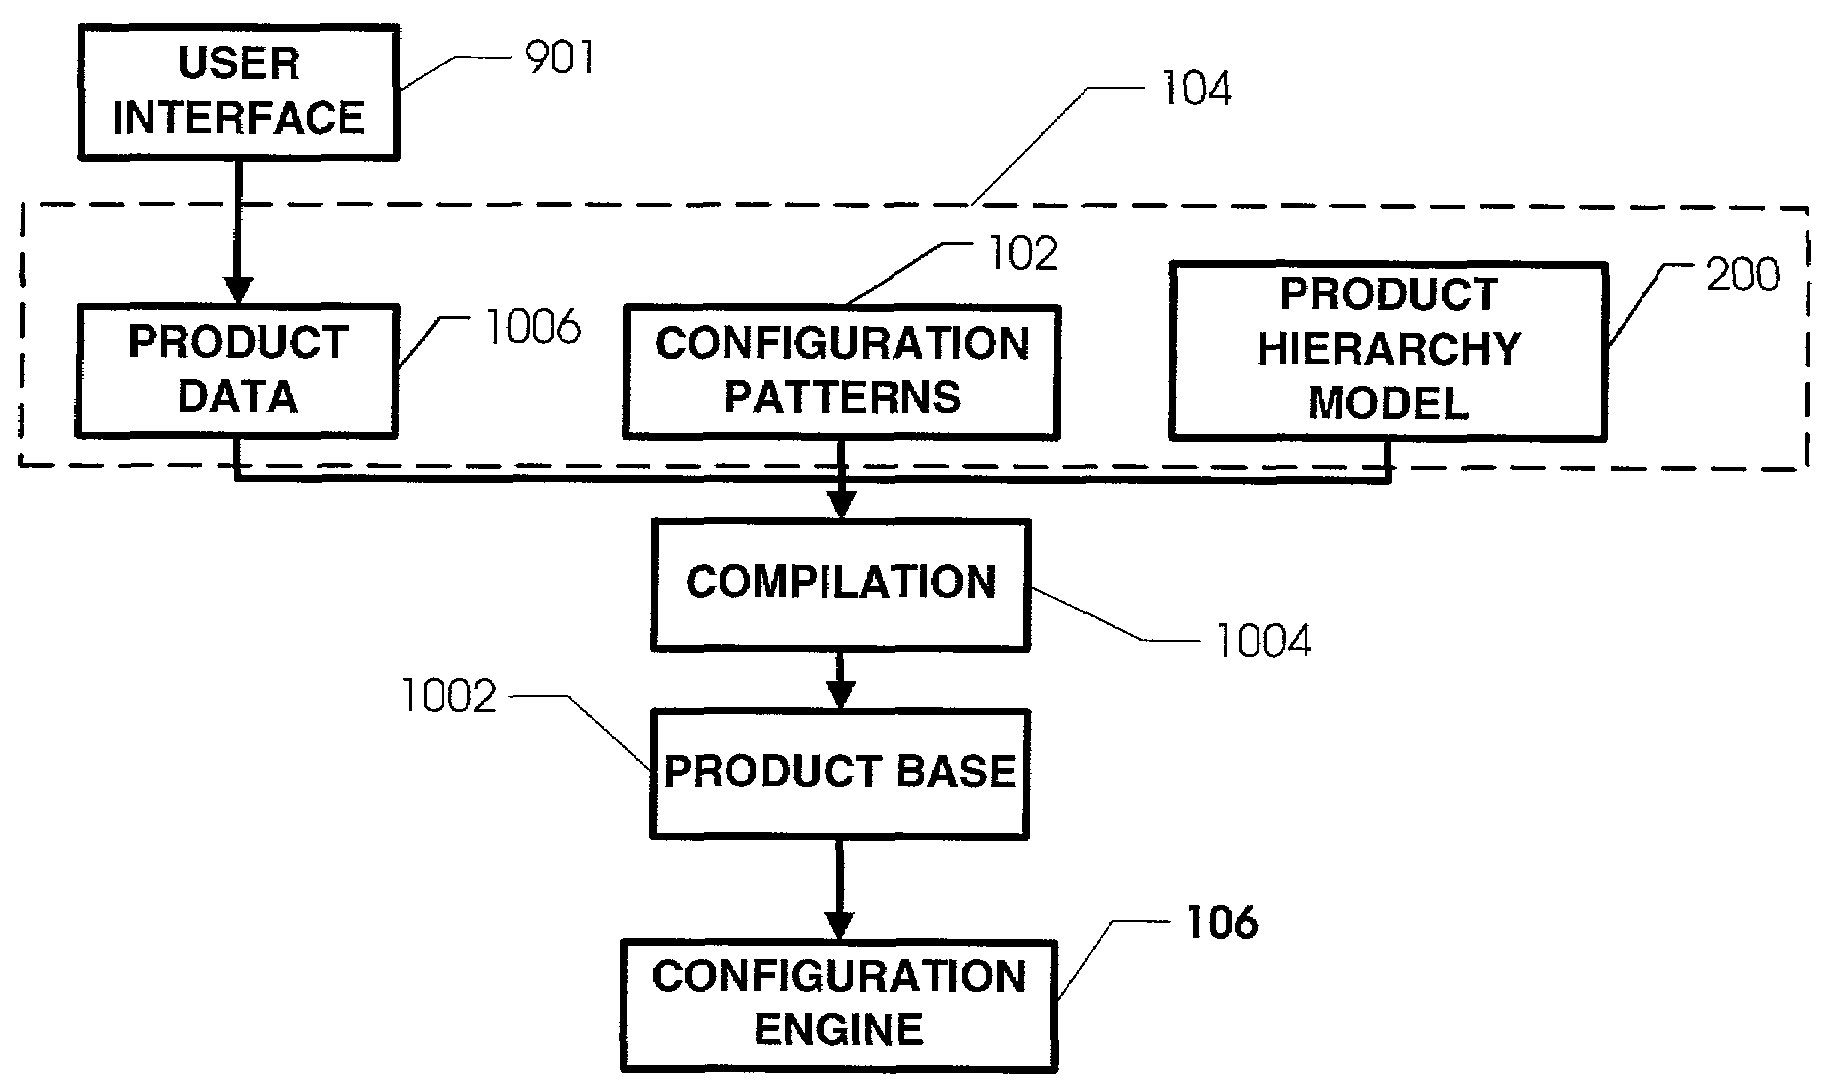 Product configuration using configuration patterns